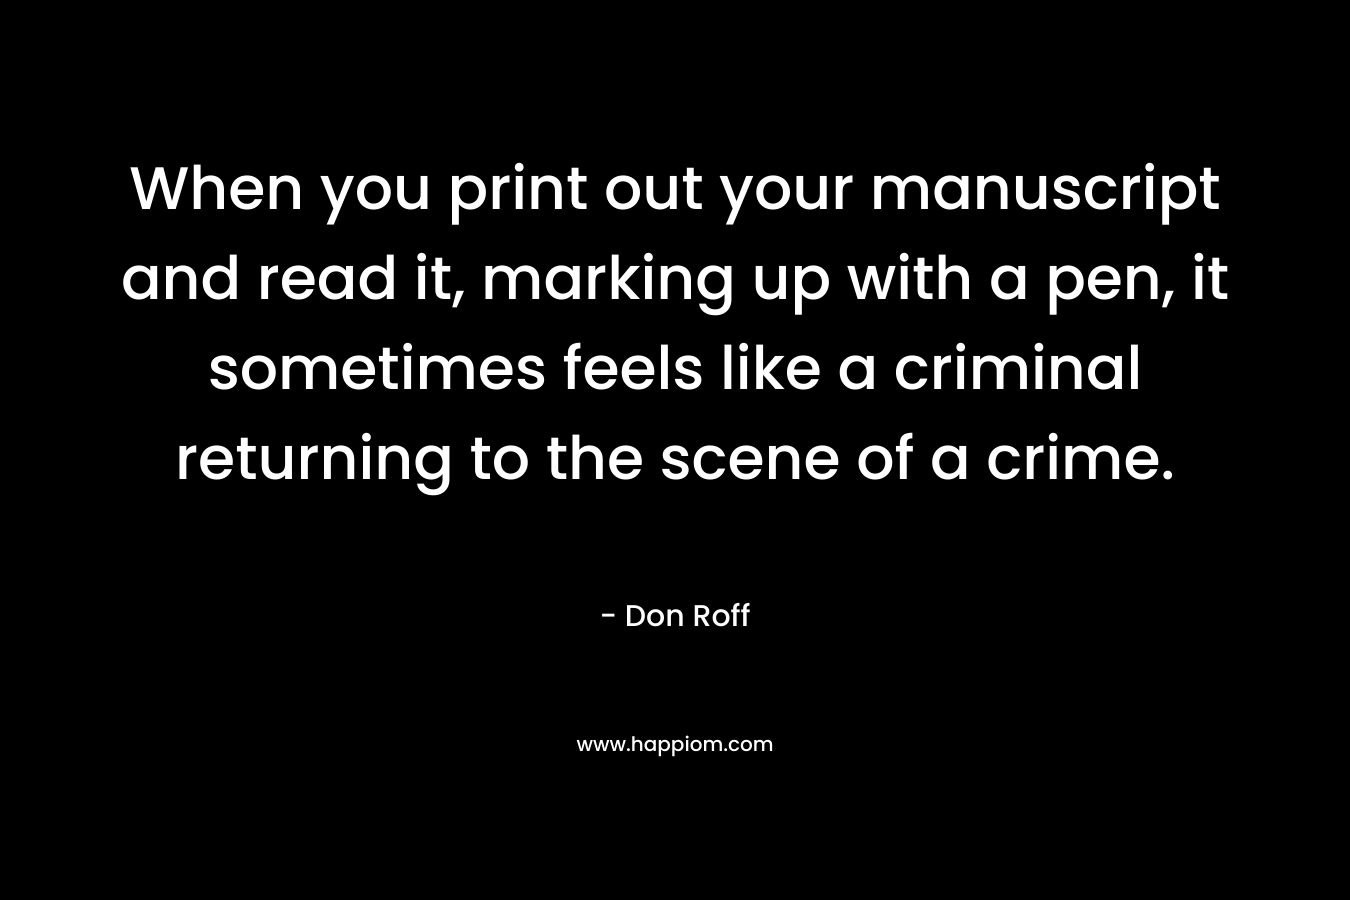 When you print out your manuscript and read it, marking up with a pen, it sometimes feels like a criminal returning to the scene of a crime. – Don Roff